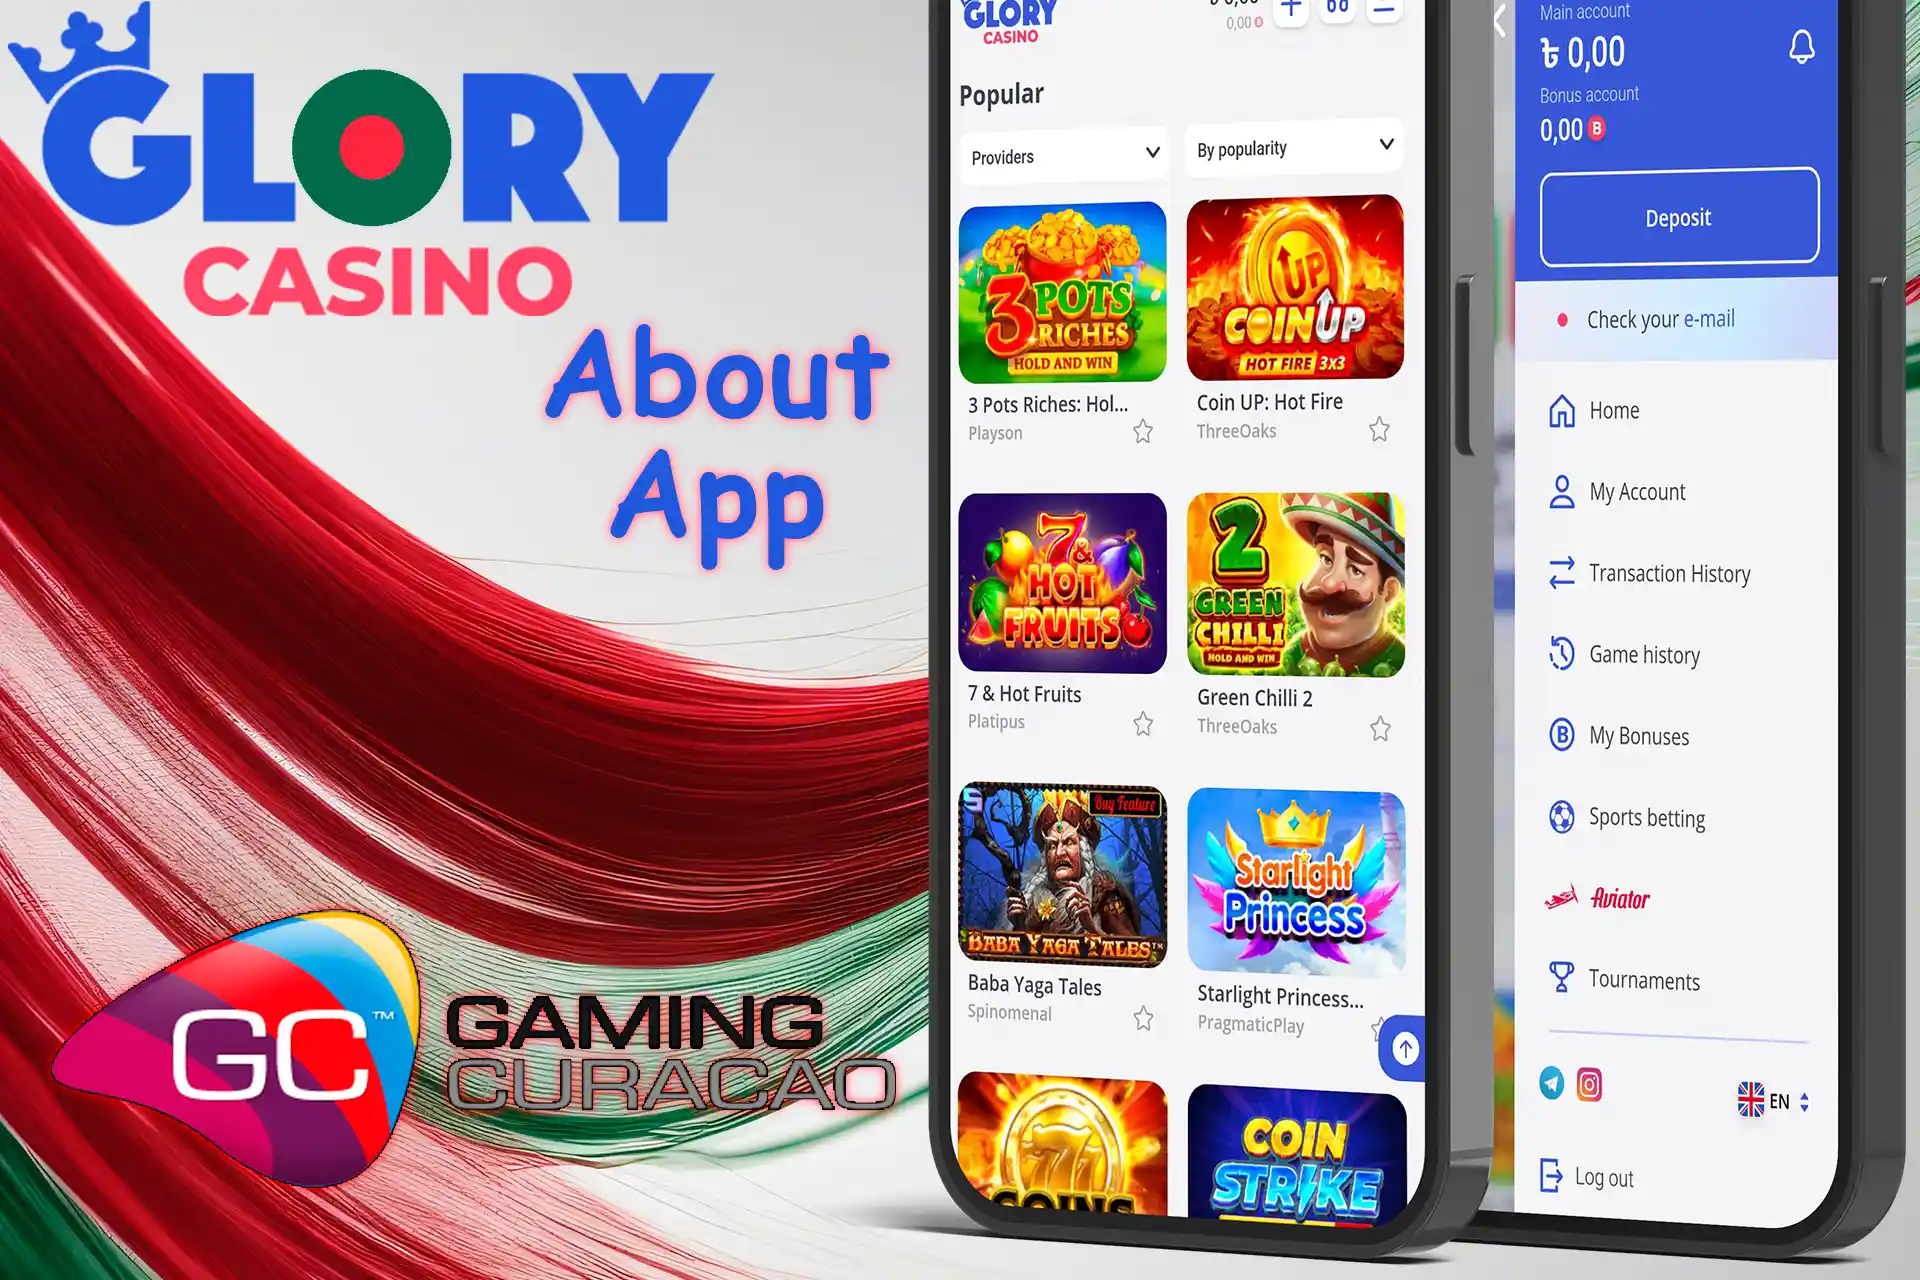 Basic information about the Glory Casino Bangladesh mobile application